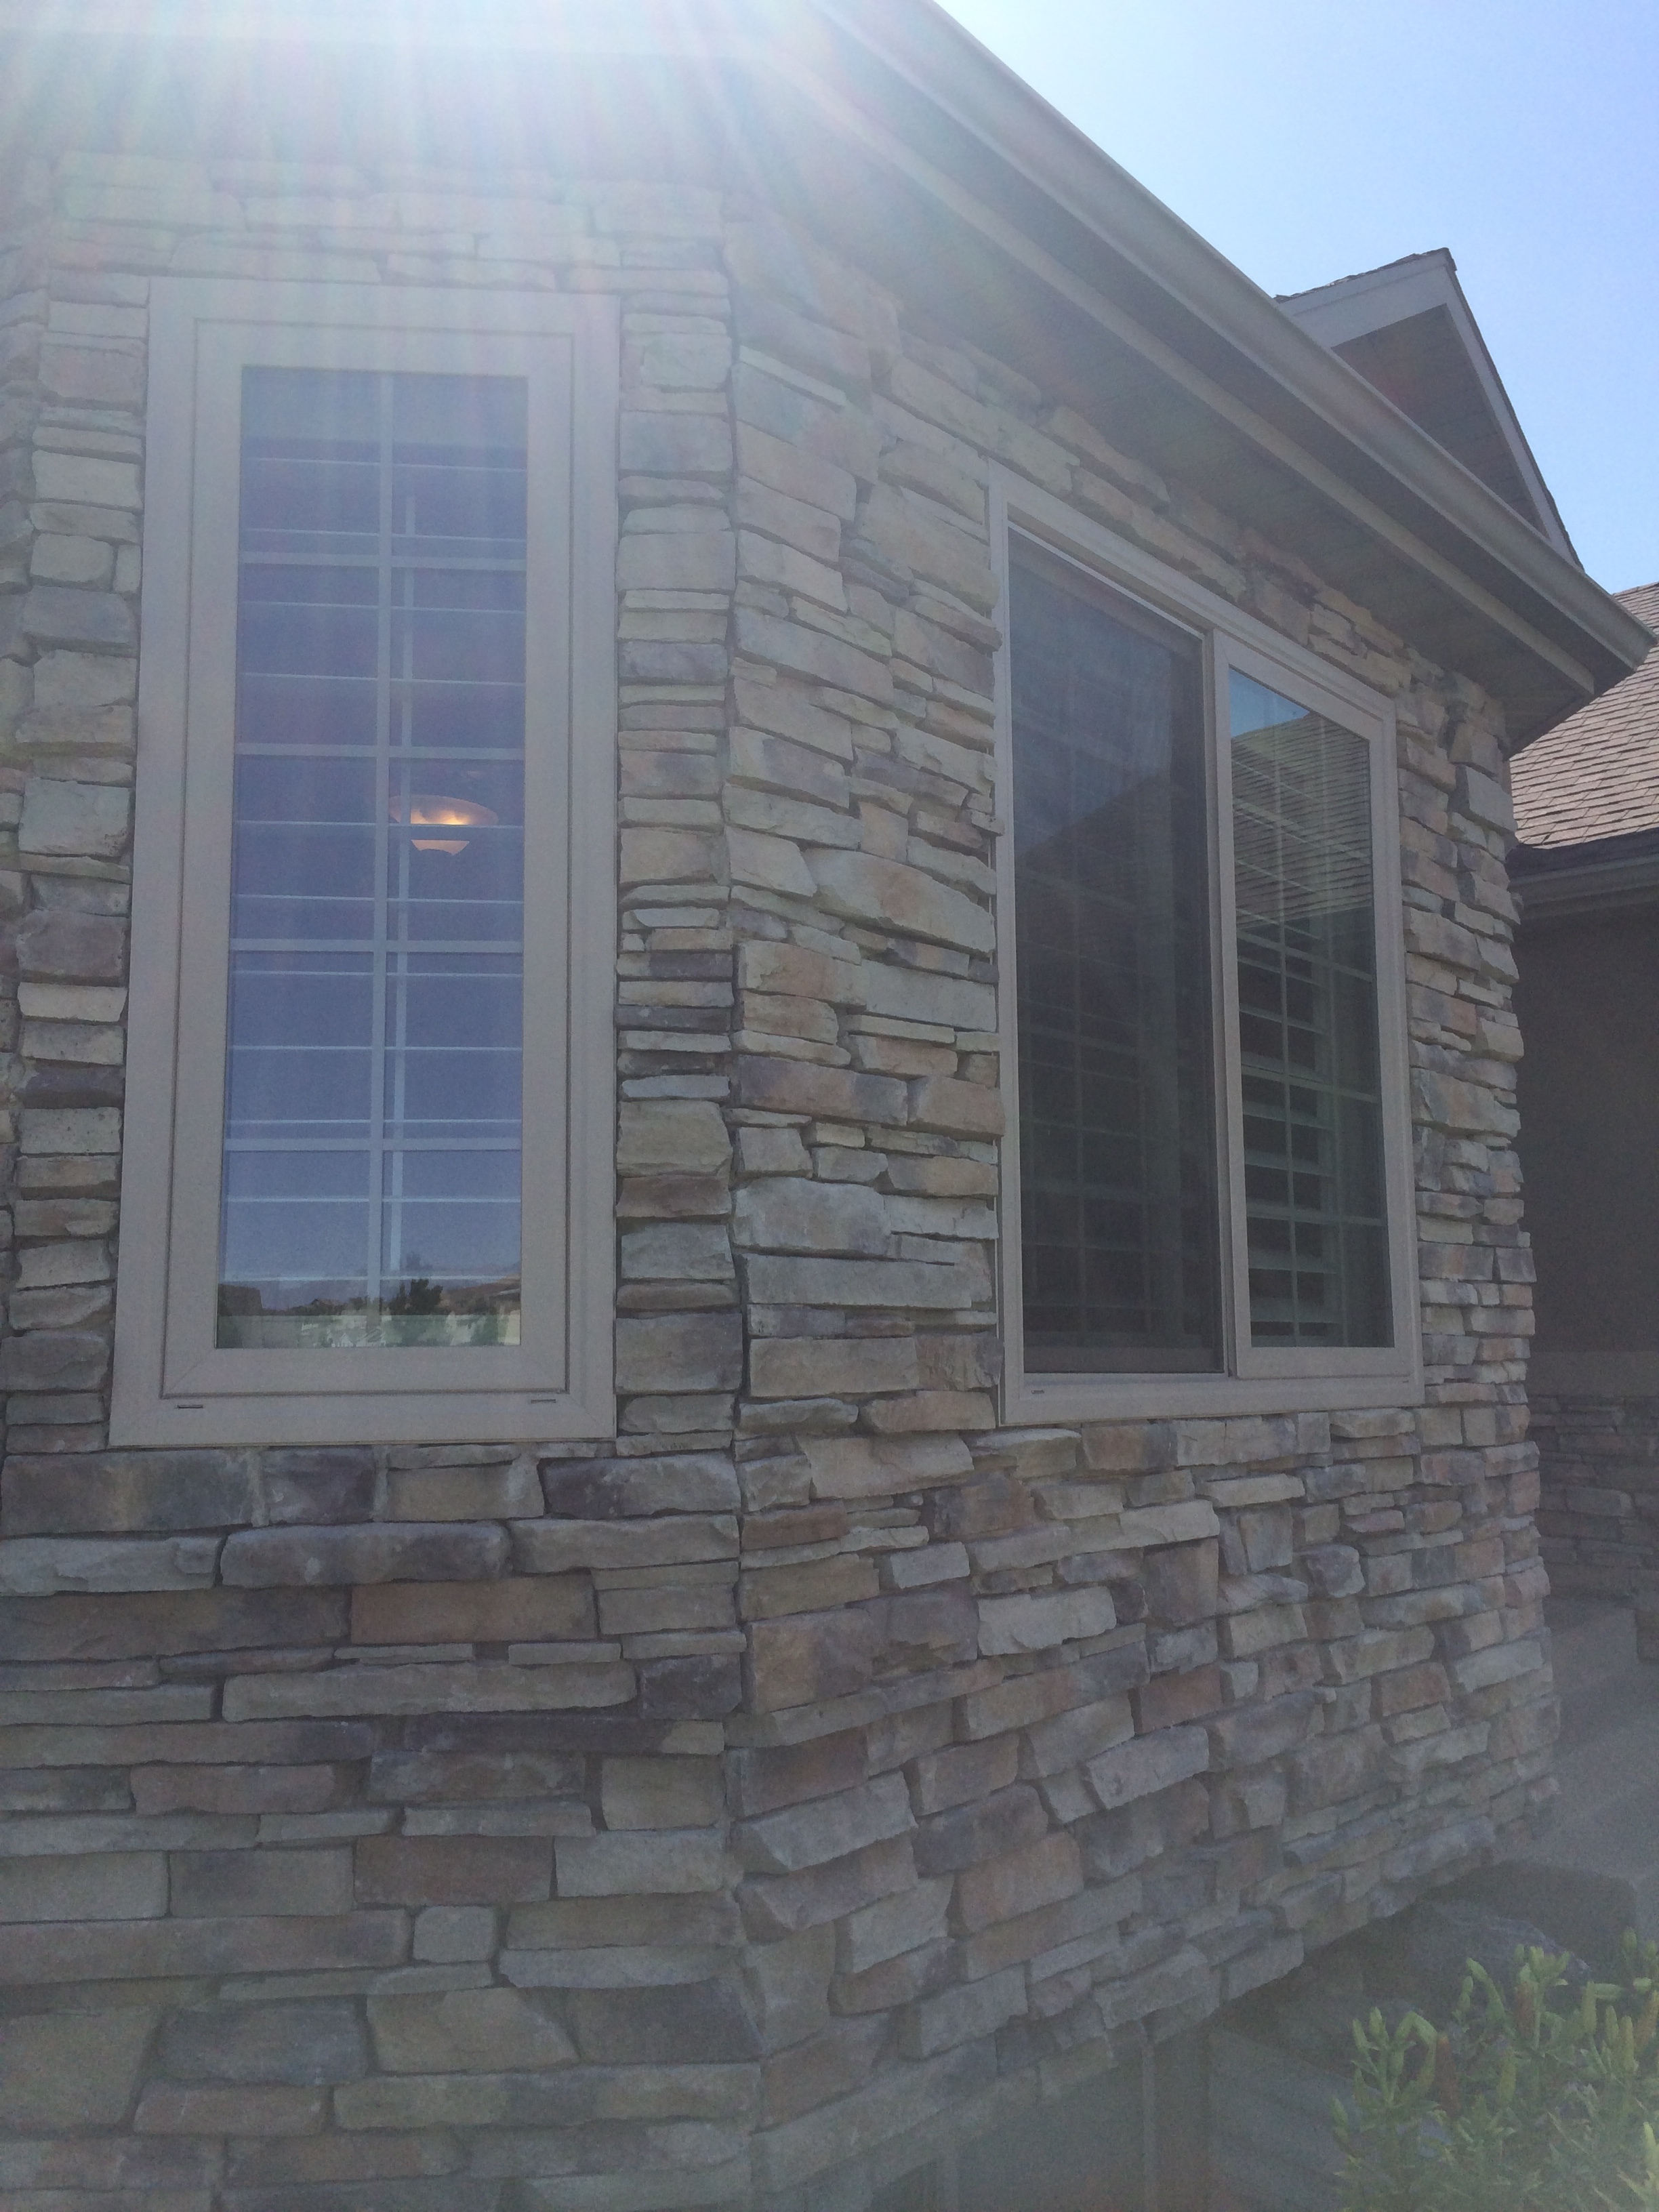 windows supplier and contractor lindon utah